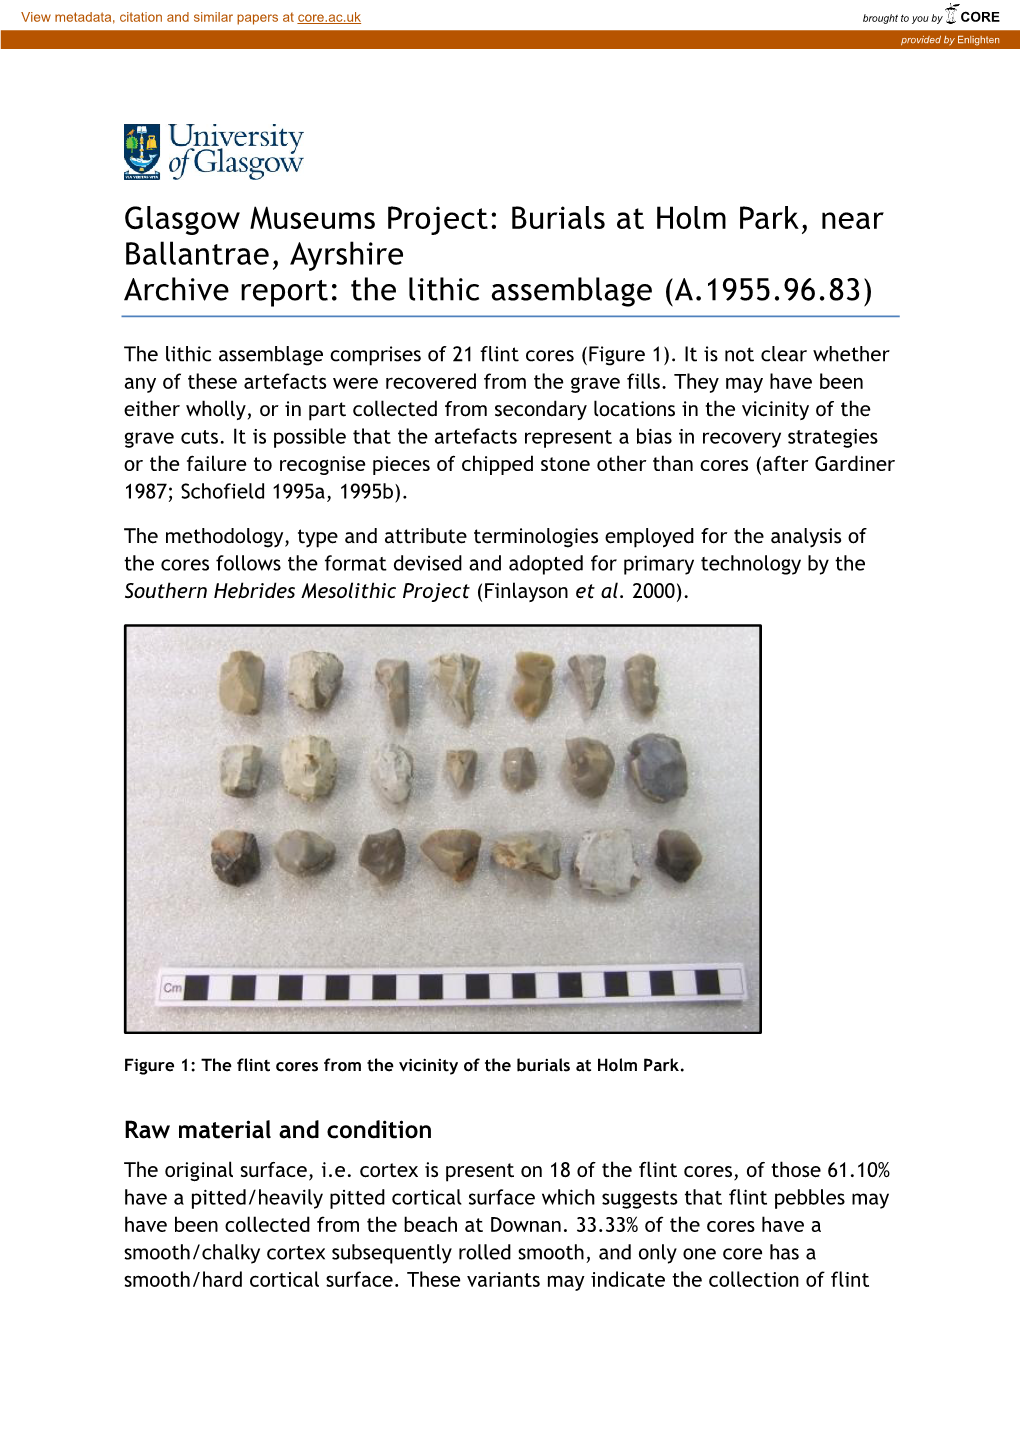 Glasgow Museums Project: Burials at Holm Park, Near Ballantrae, Ayrshire Archive Report: the Lithic Assemblage (A.1955.96.83)